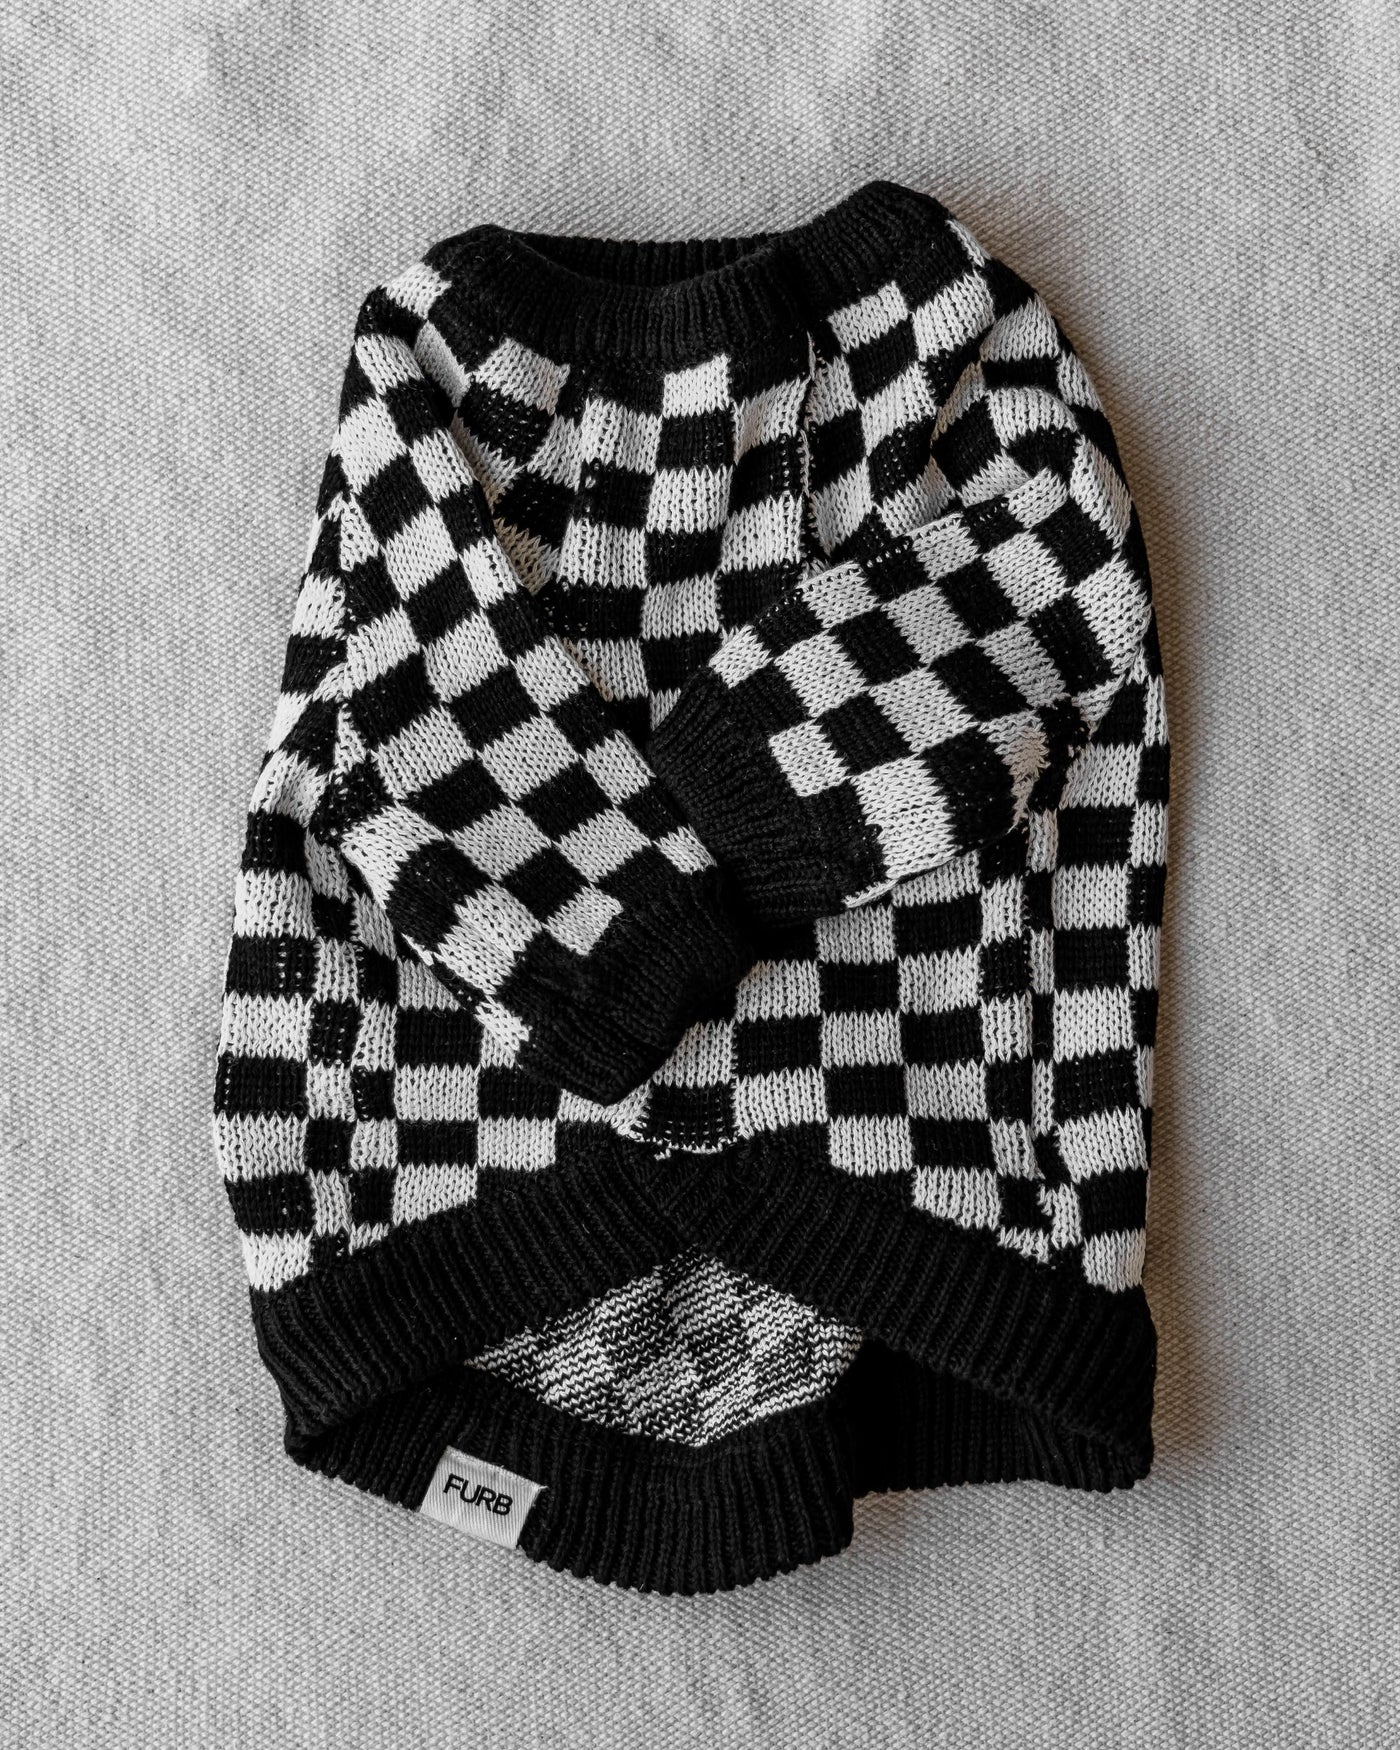 Arlo Black Check Sweater Product Image Detail